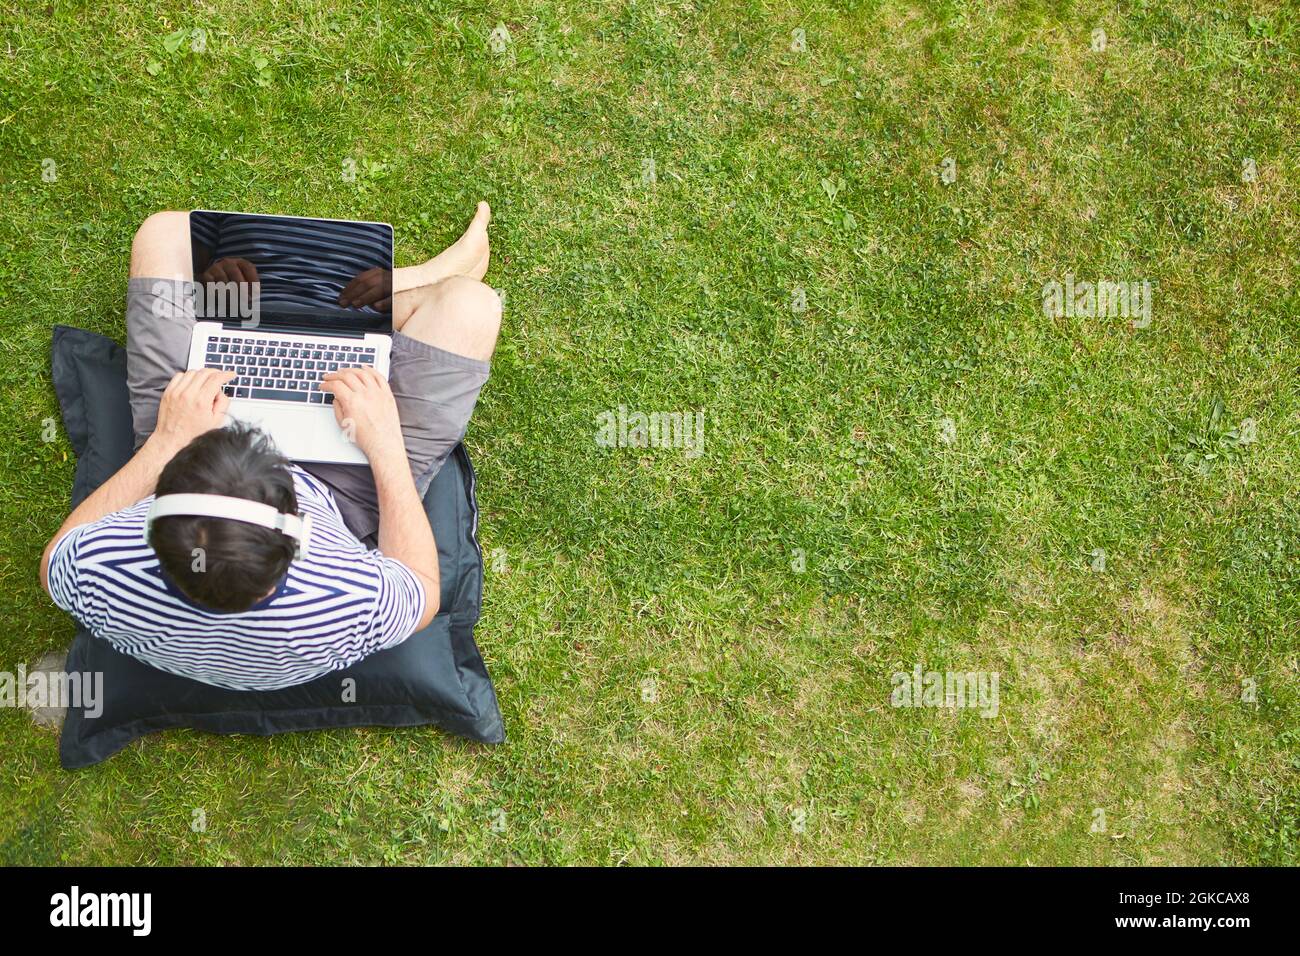 Man working as a freelancer on the lawn in the garden with laptop during a video conference Stock Photo